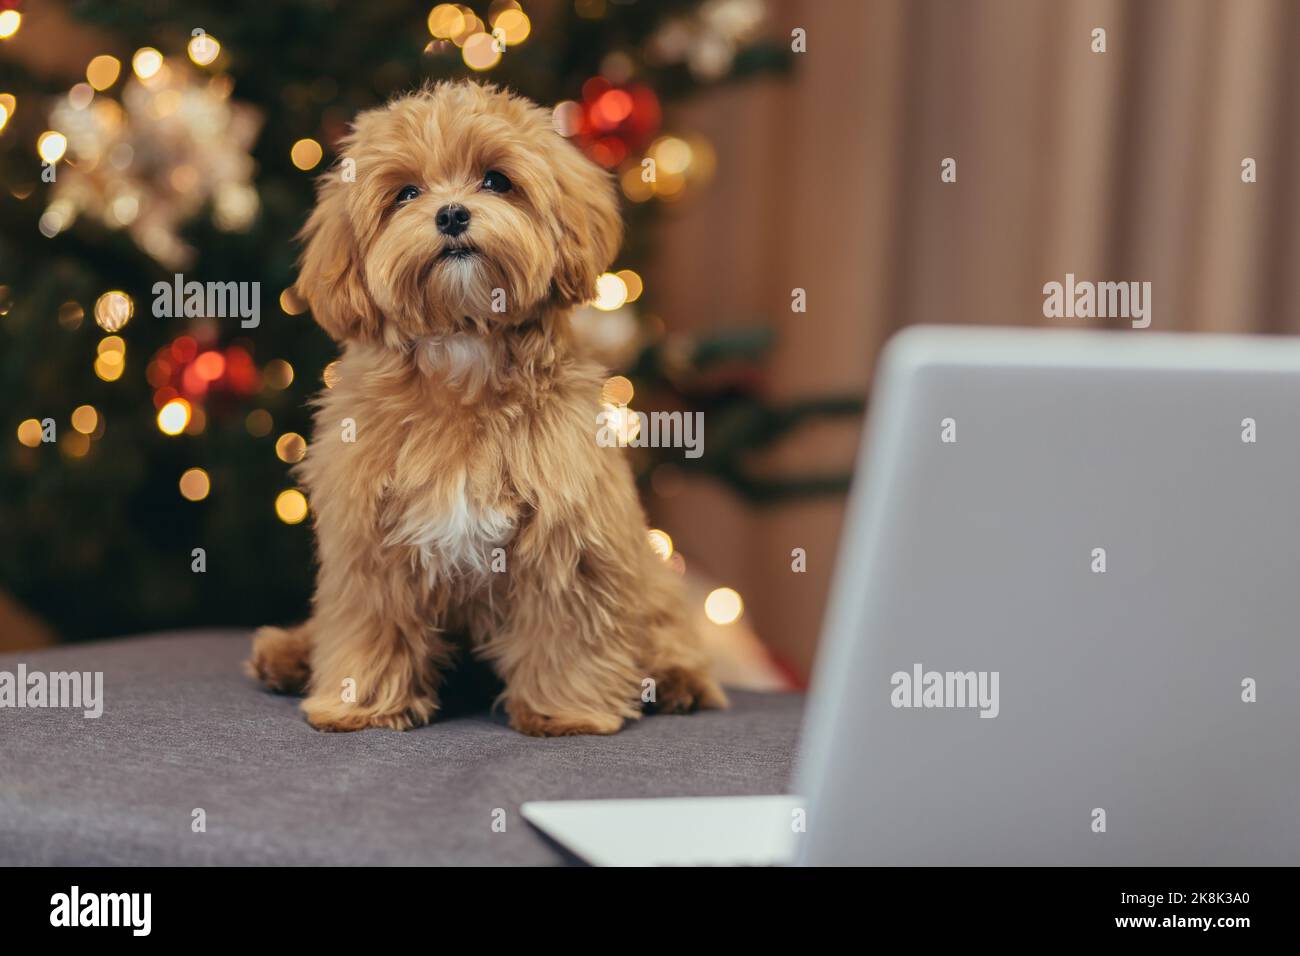 Little pet dog balona with a maltipoo poodle near the Christmas tree on Christmas night watching a video on a laptop while sitting on a brown sofa. Stock Photo